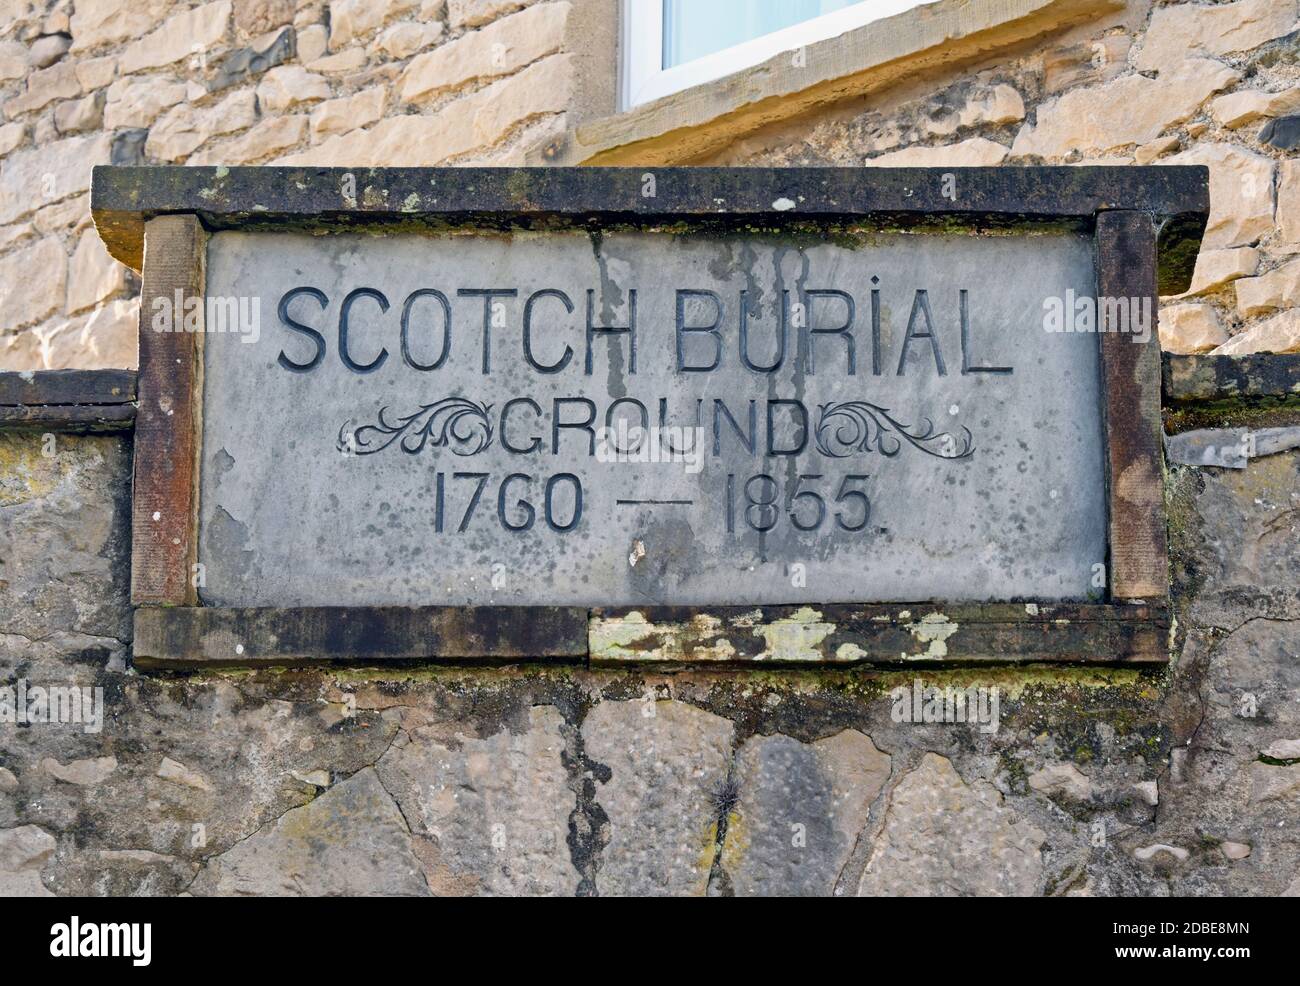 Date stone above the entrance to the 'Scotch Burial Ground 1760 - 1855'. Beast Banks, Kendal, Cumbria, England, United Kingdom, Europe. Stock Photo